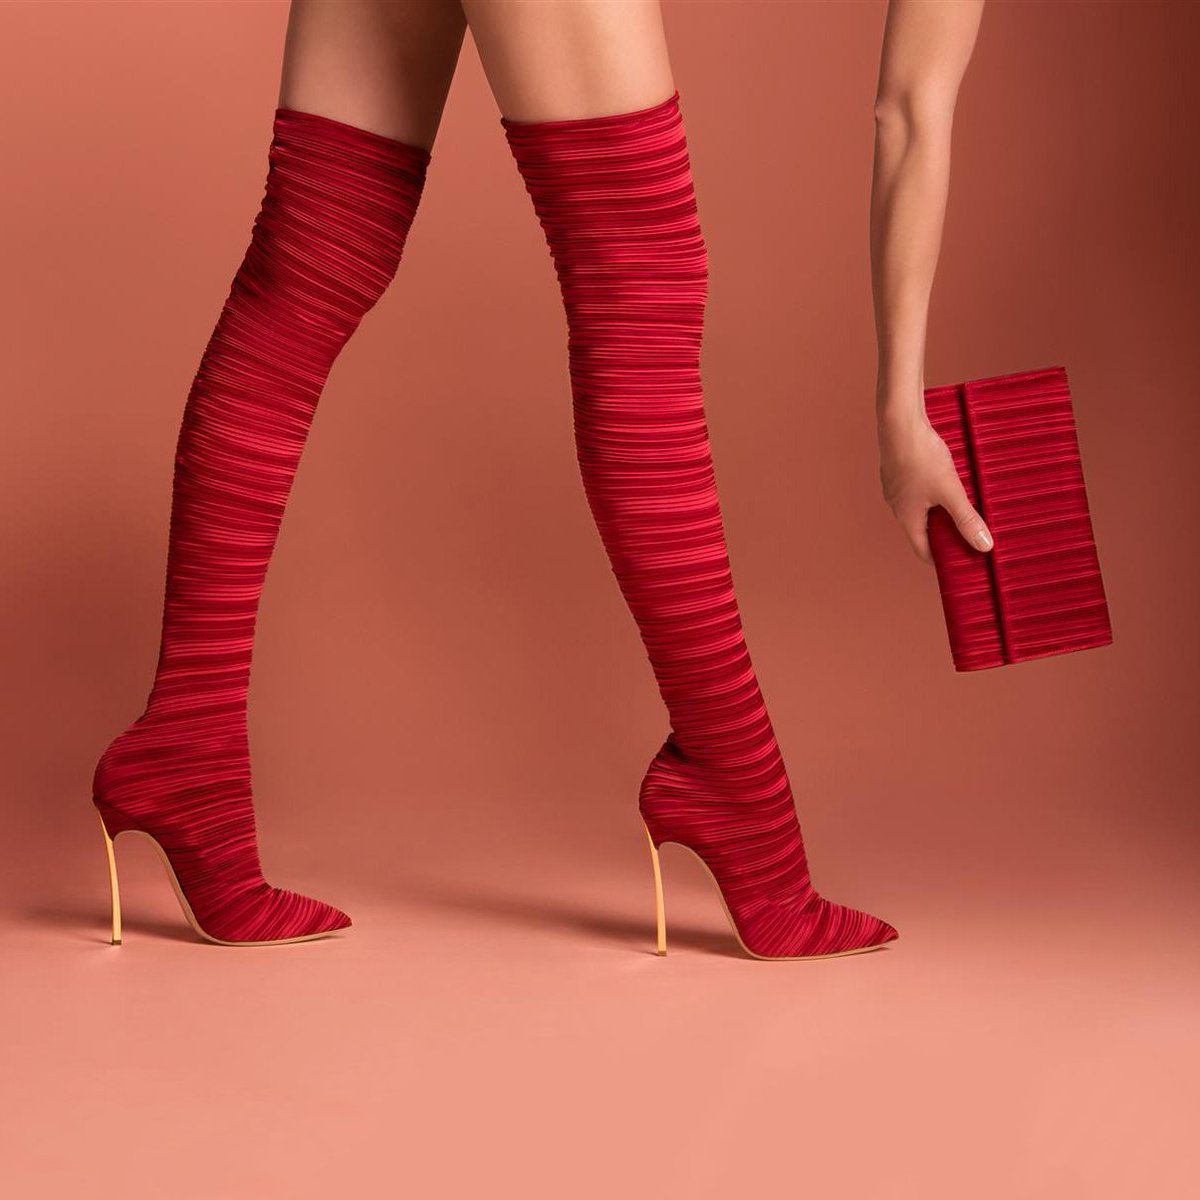 casadei red boots